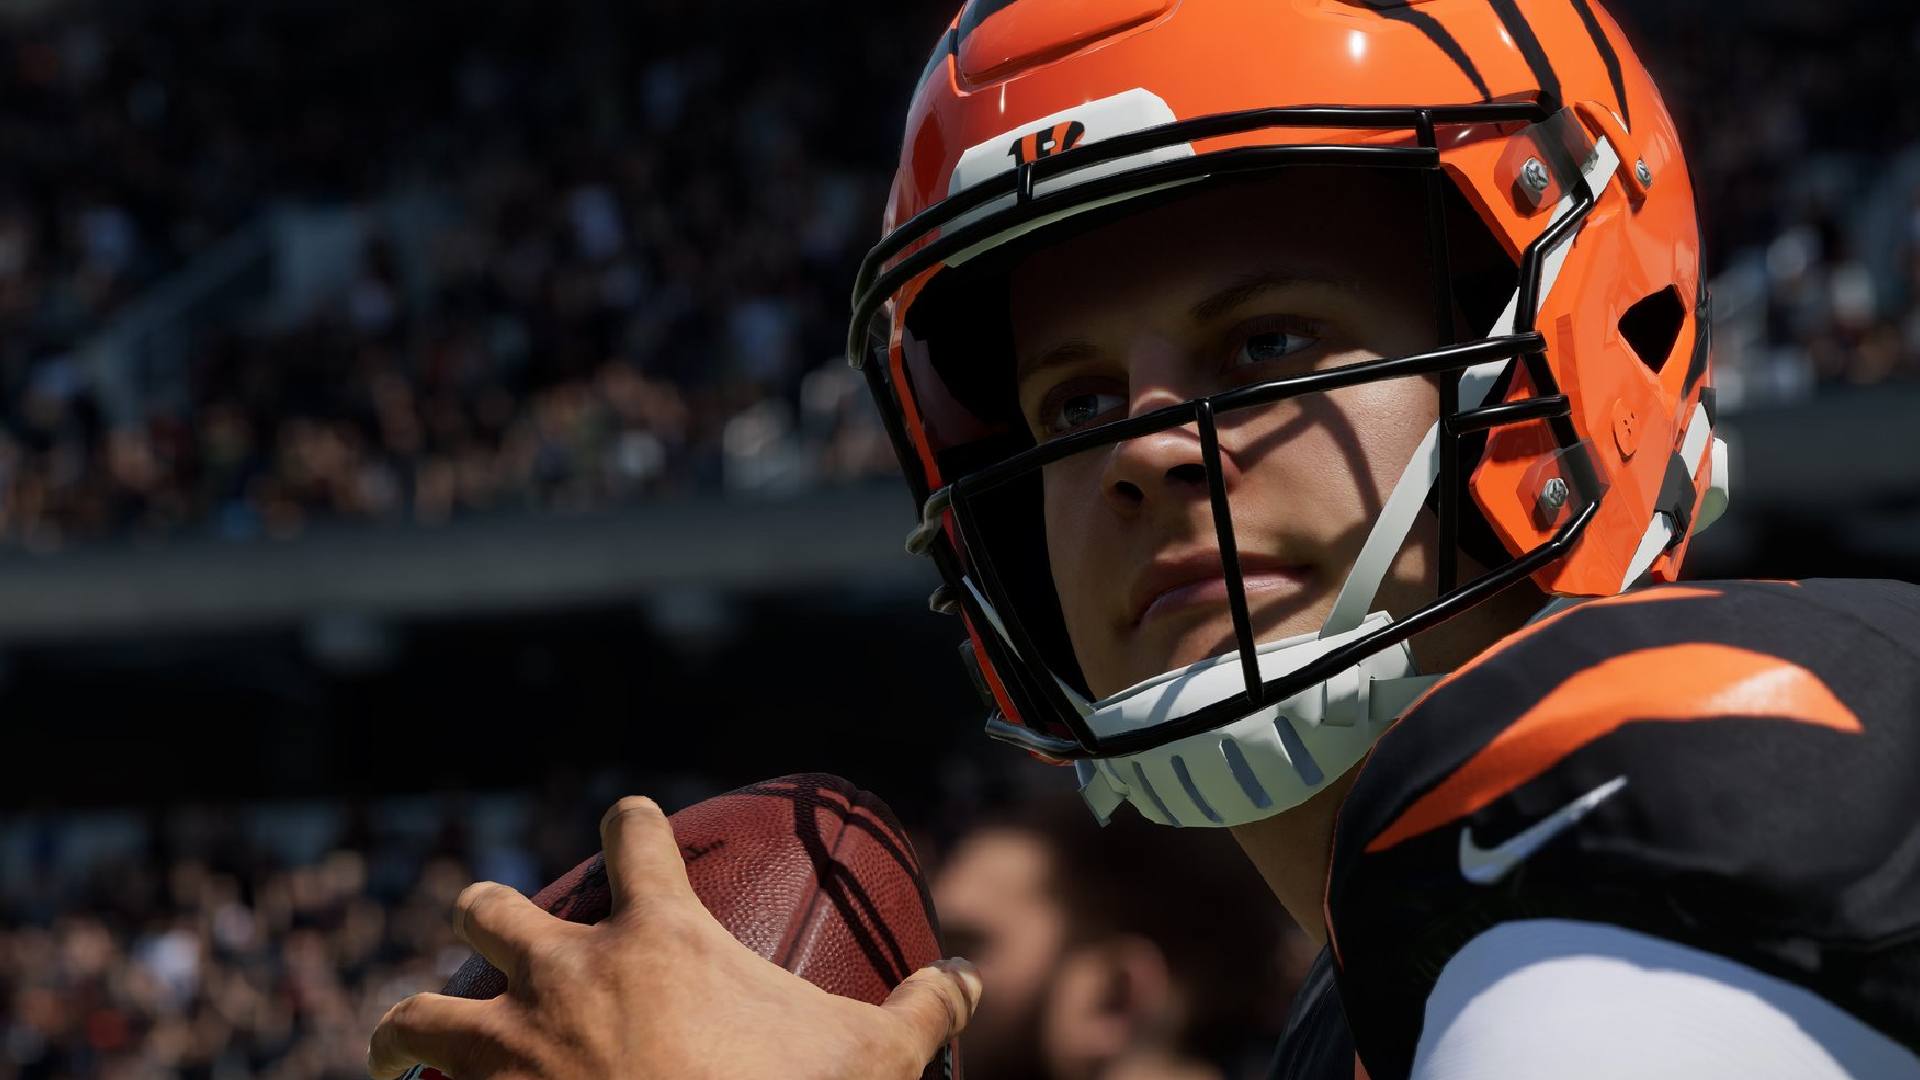 Madden NFL 23 Release Date: Trailer, Gameplay, and Features